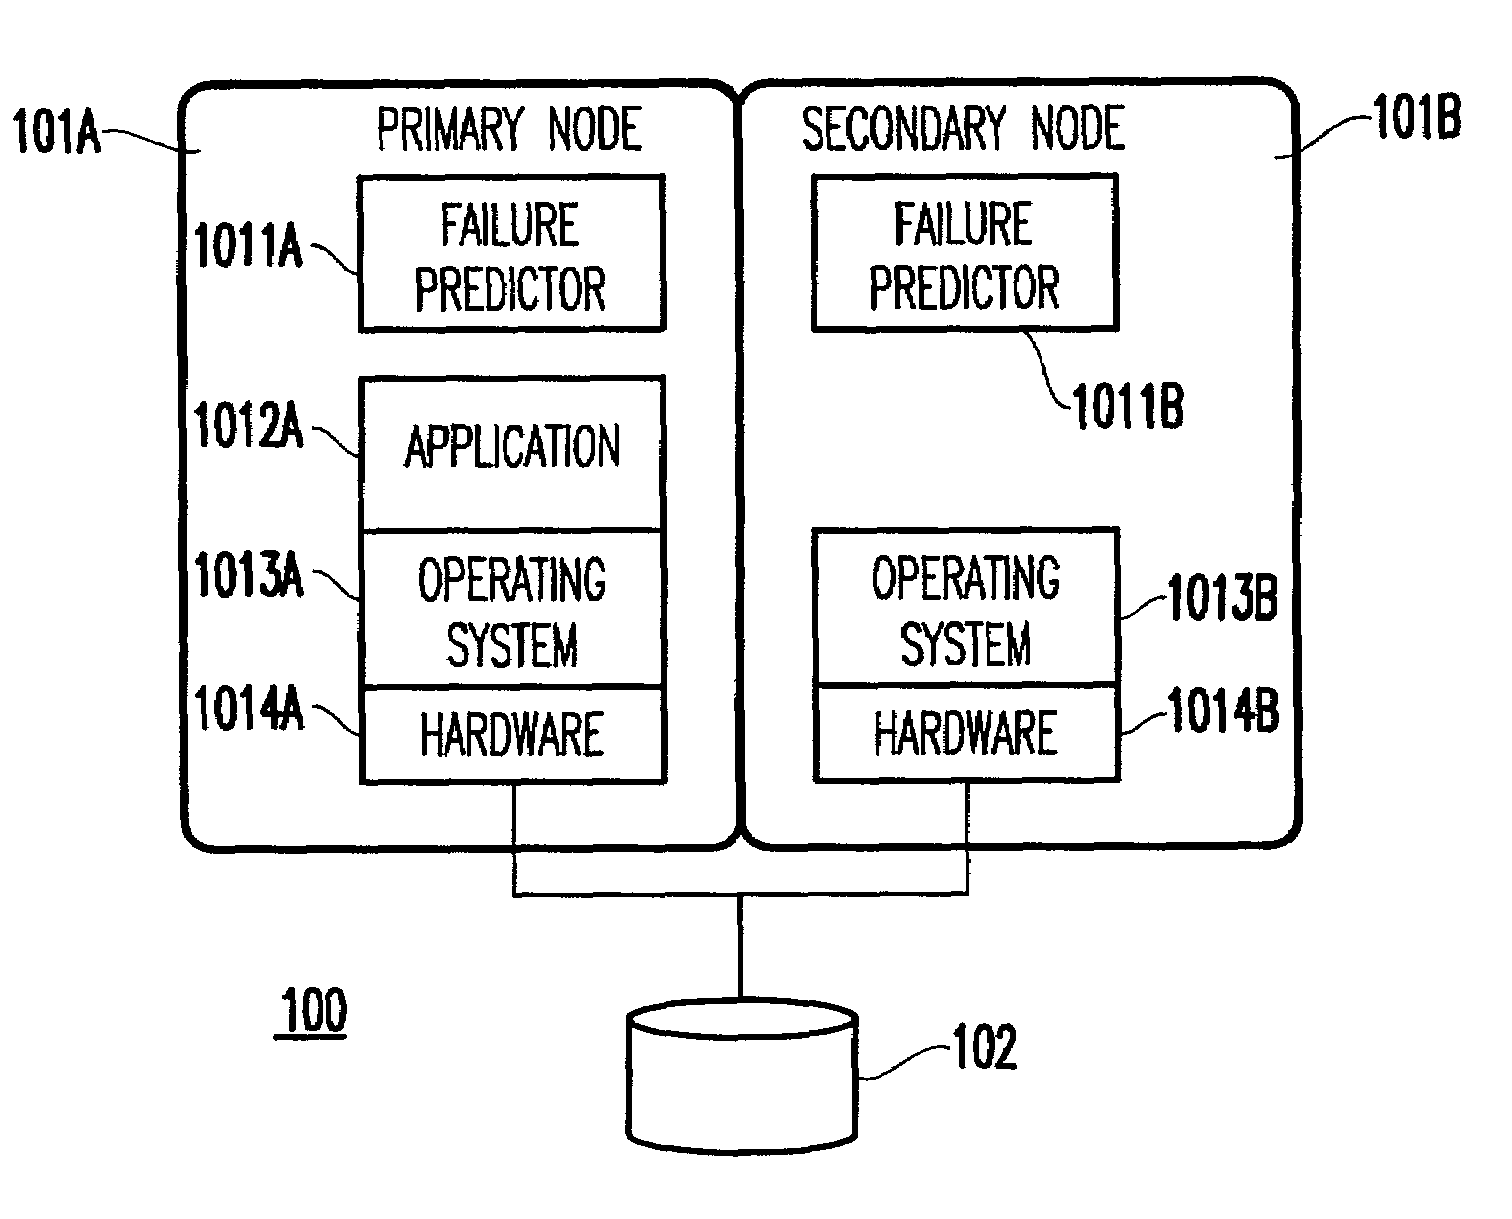 Method and system for proactively reducing the outage time of a computer system